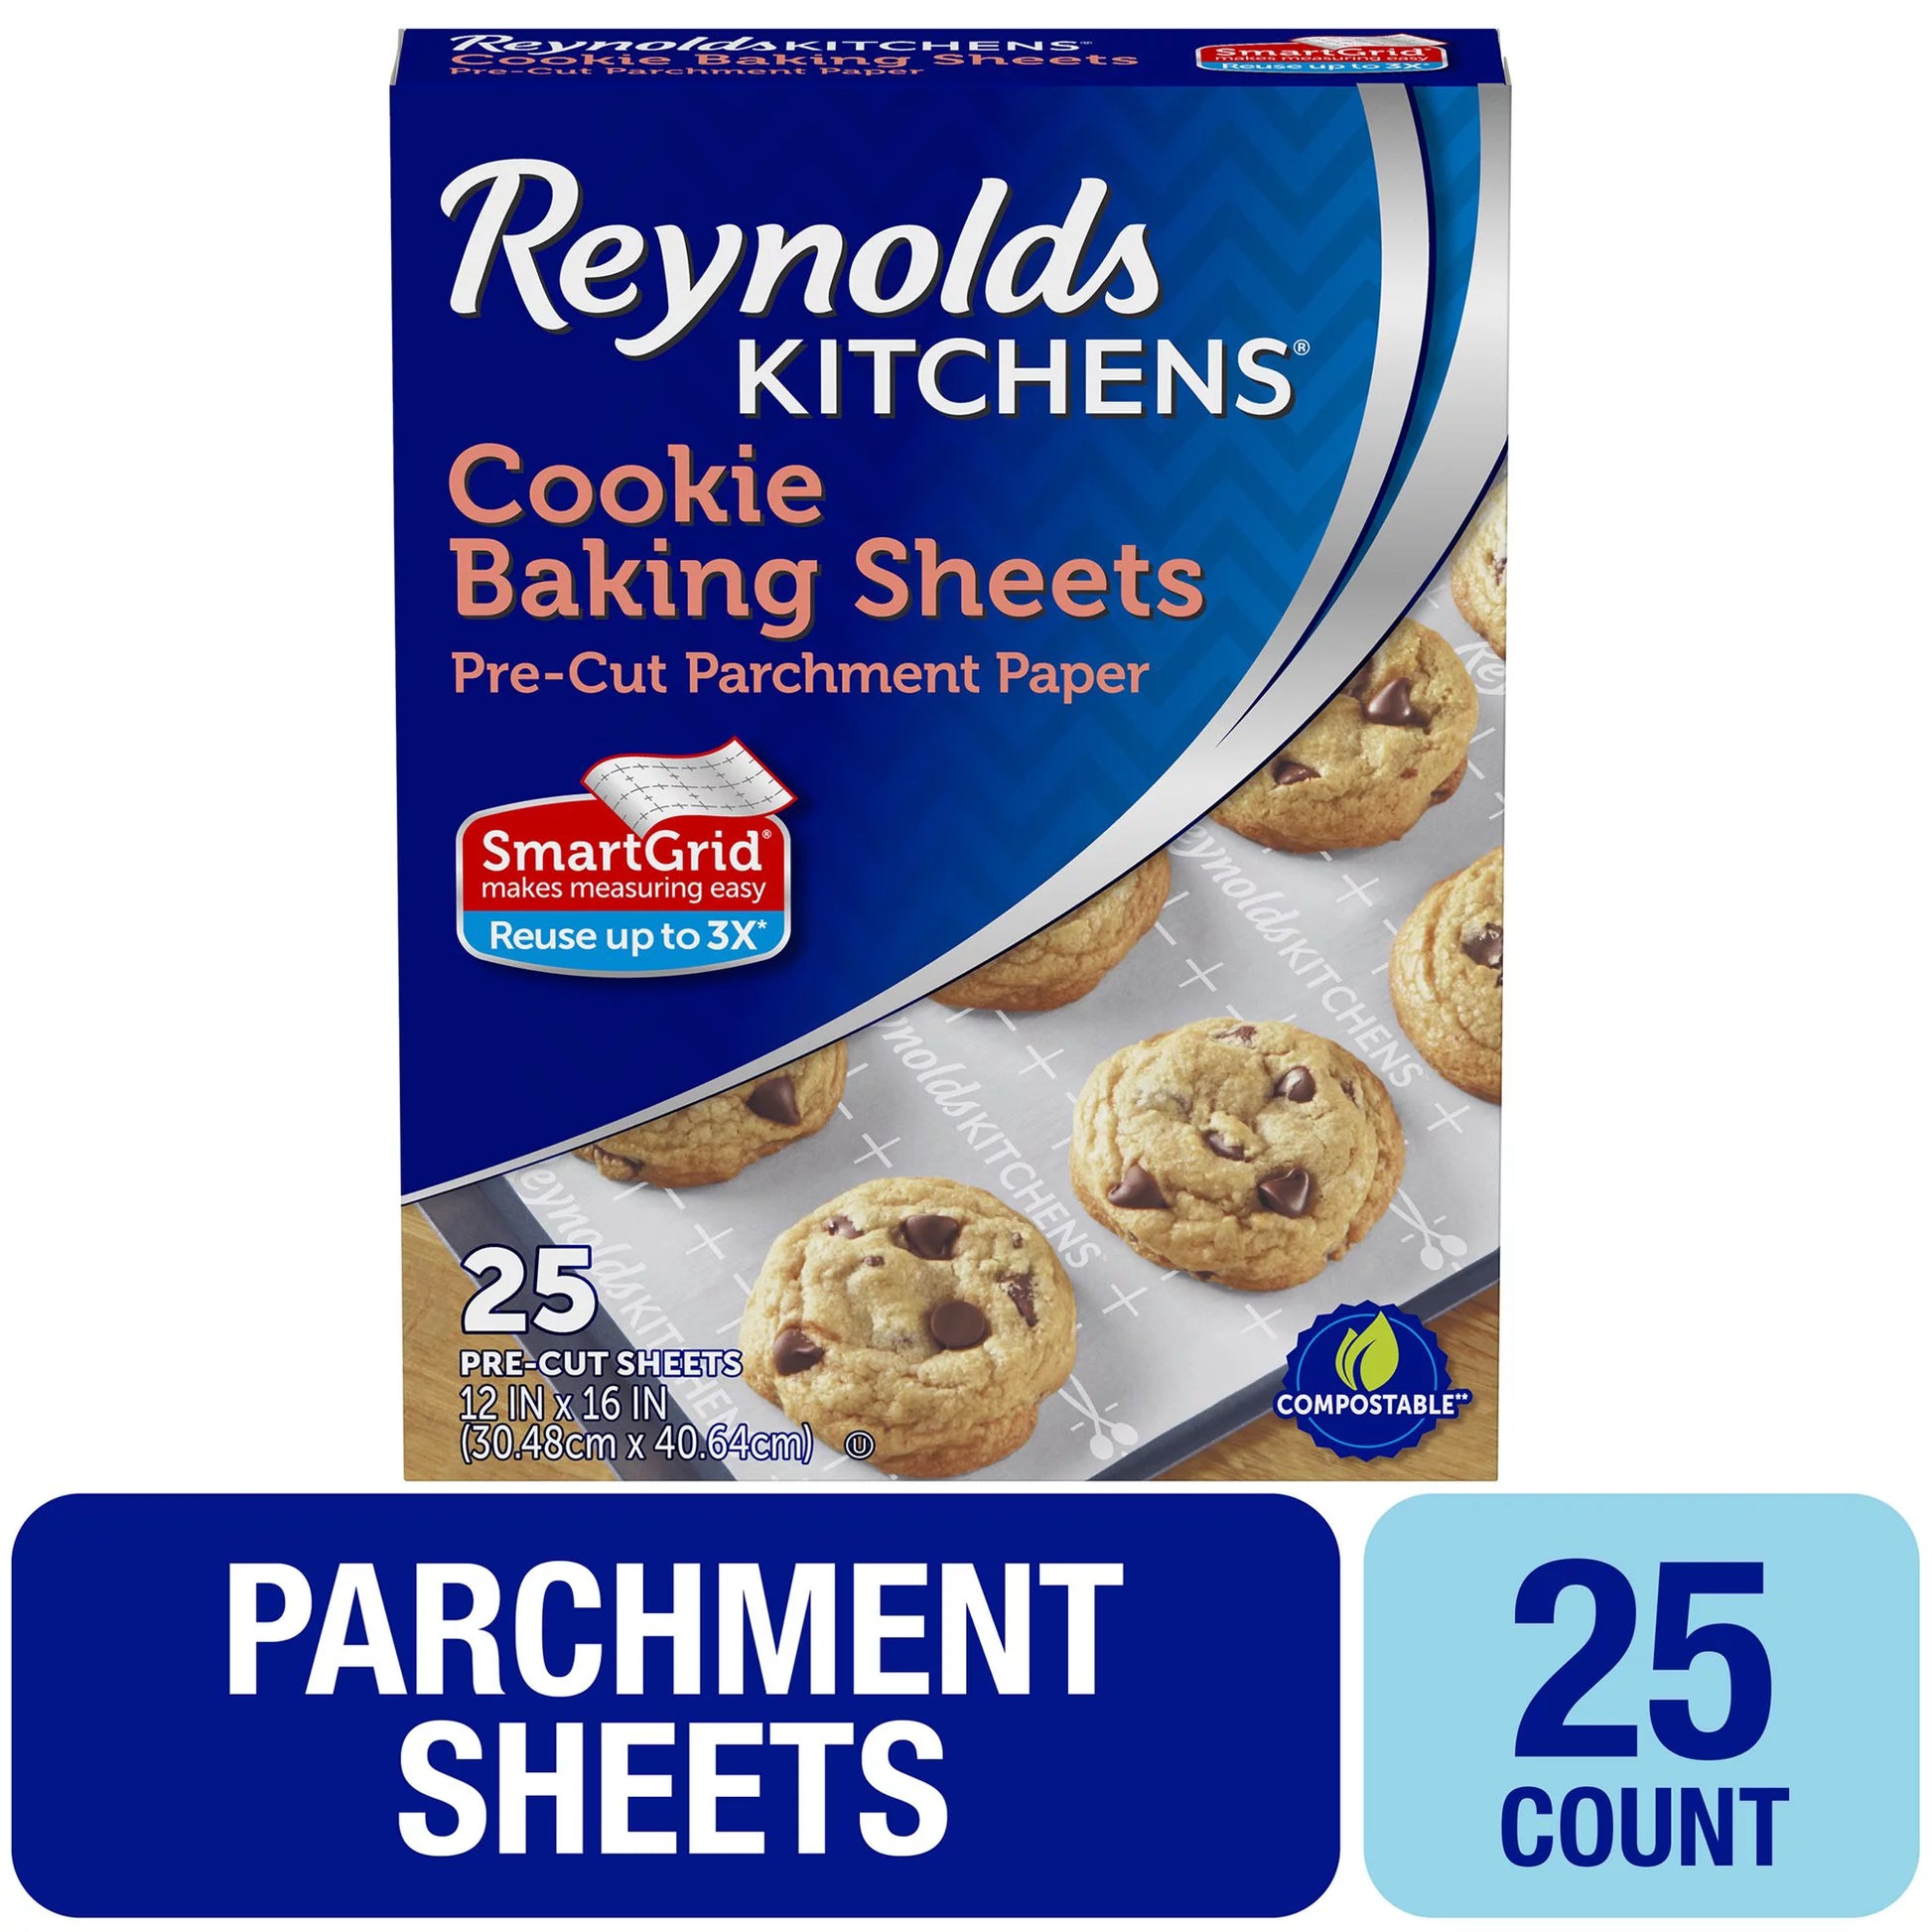 NEW) Reynolds Cookie Baking Sheets Parchment Paper 8 Precut Sheets